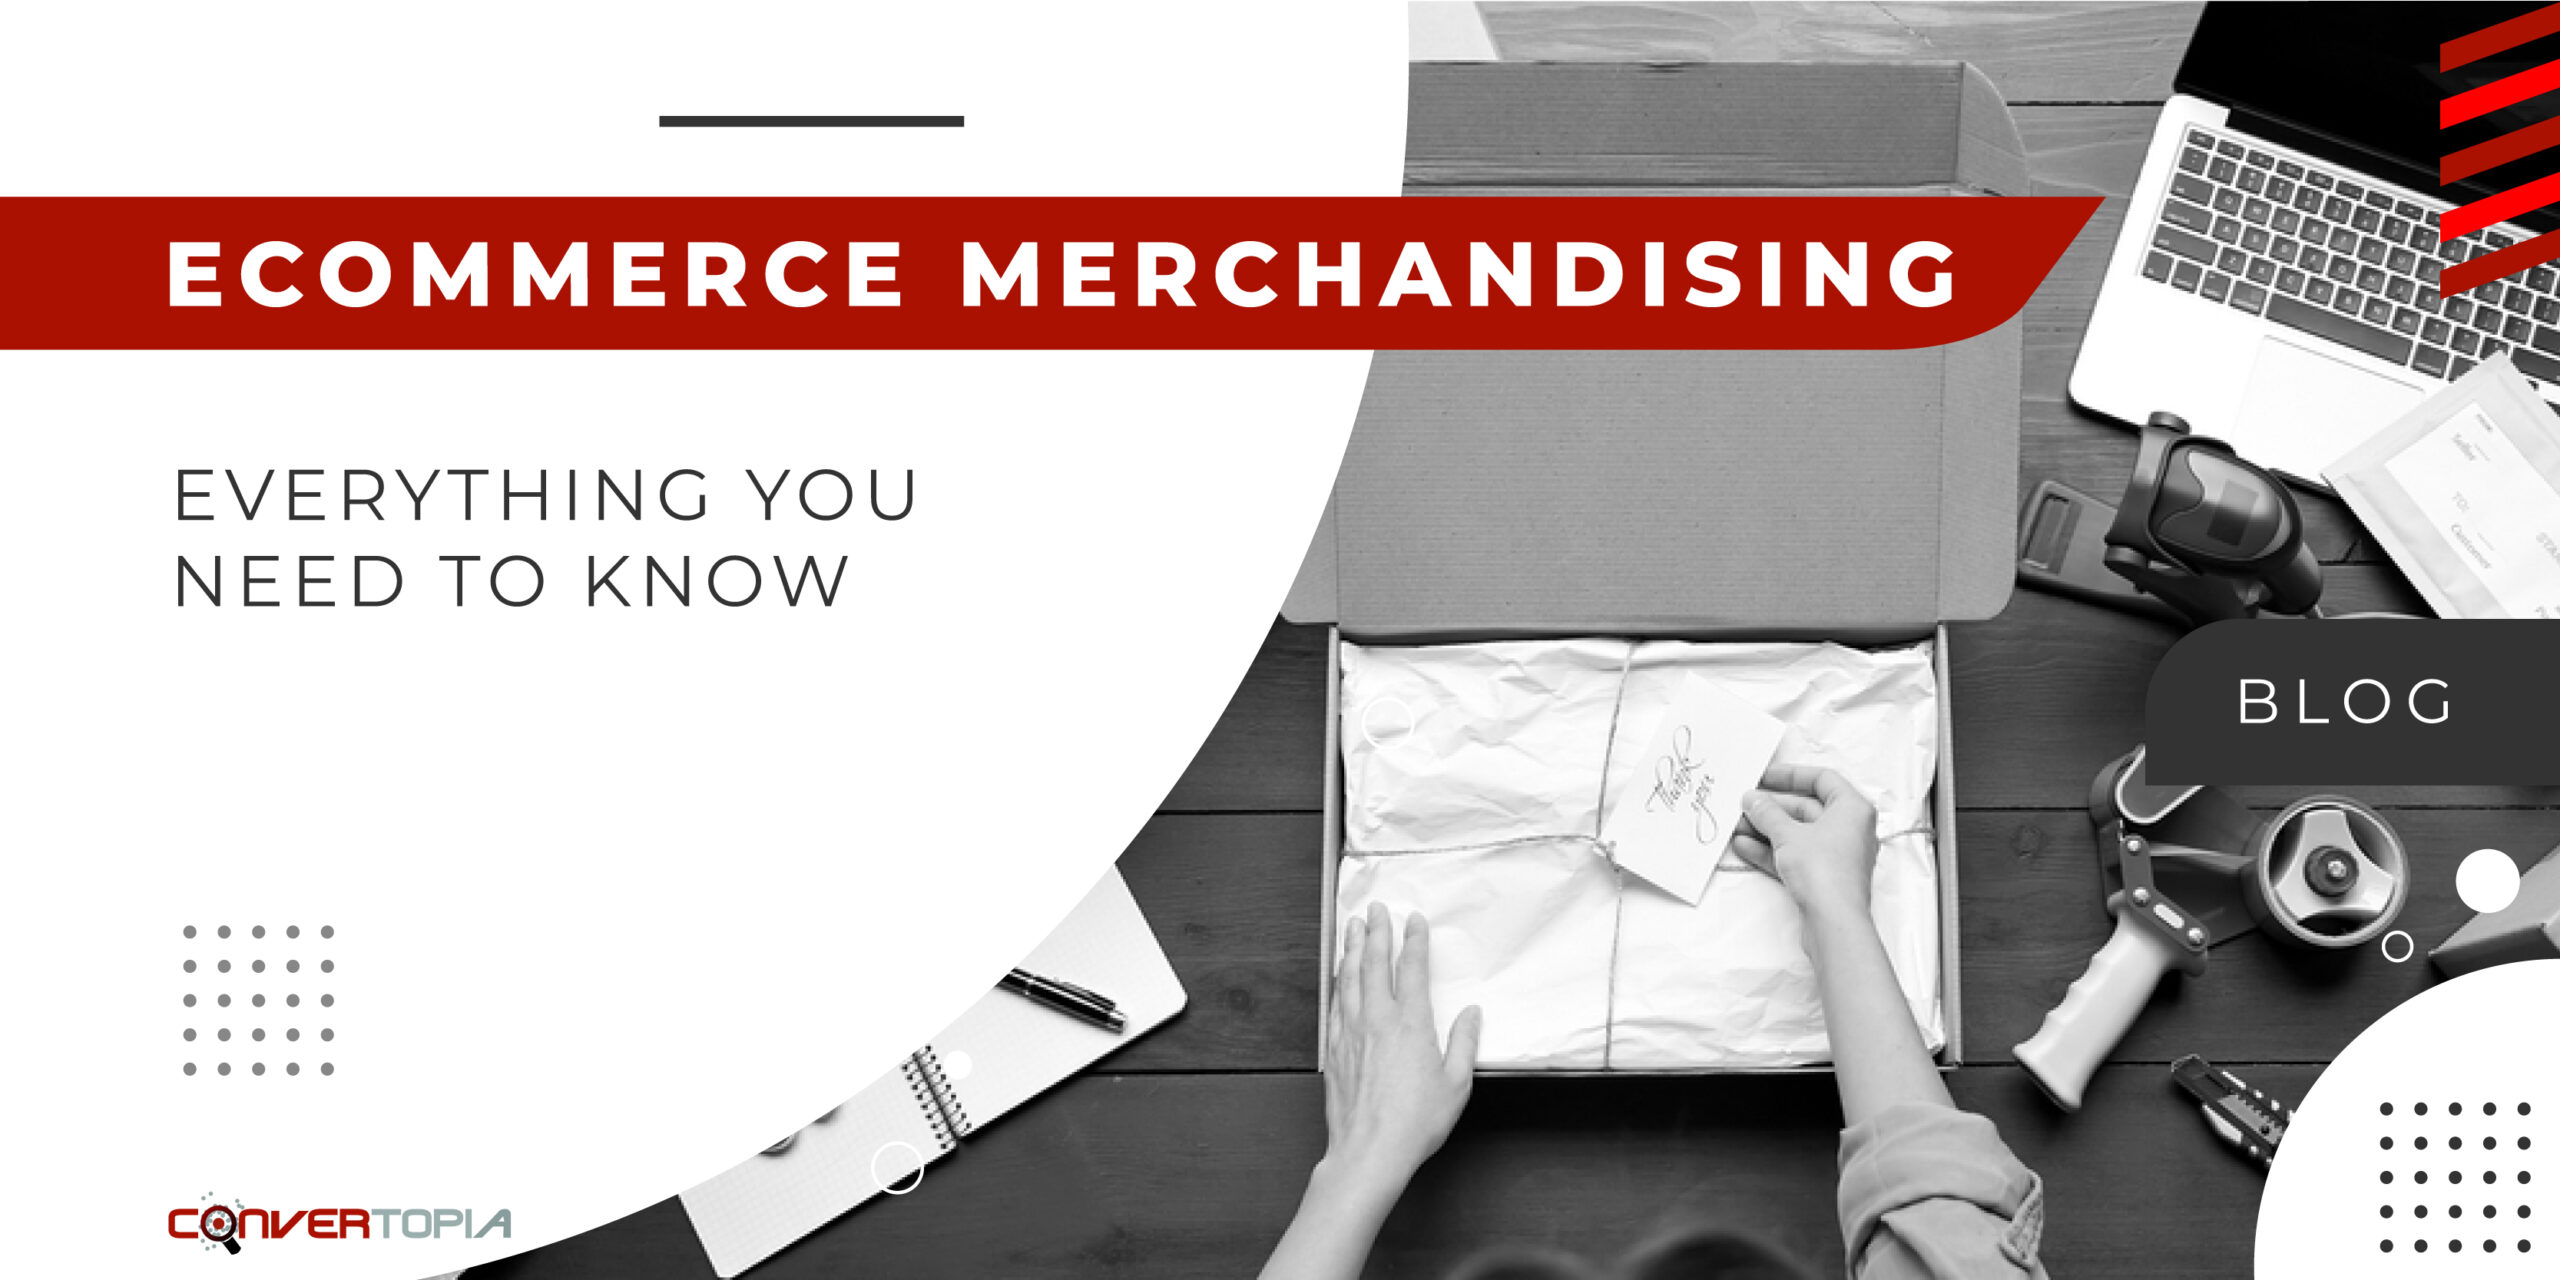 E-commerce Merchandising- Everything you need to know